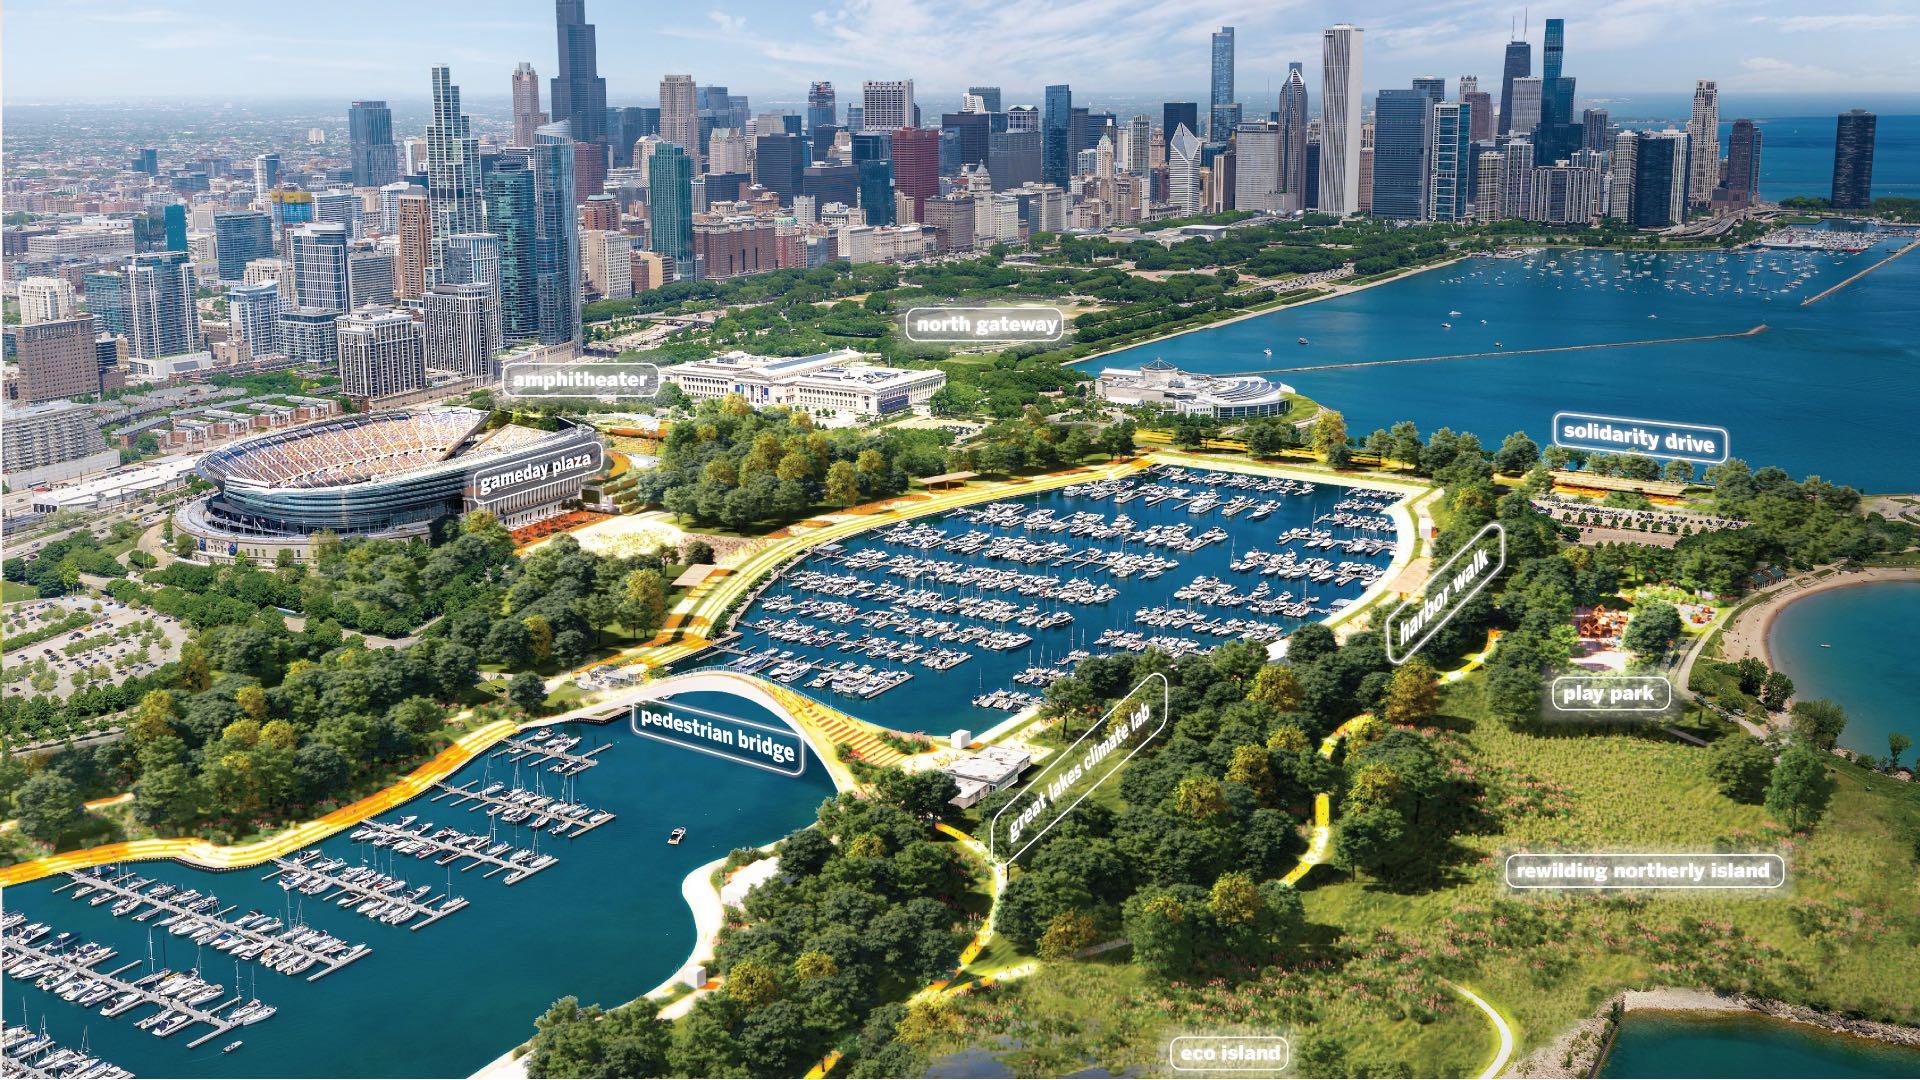 A proposed pedestrian bridge would improve access to Northerly Island. (City of Chicago)